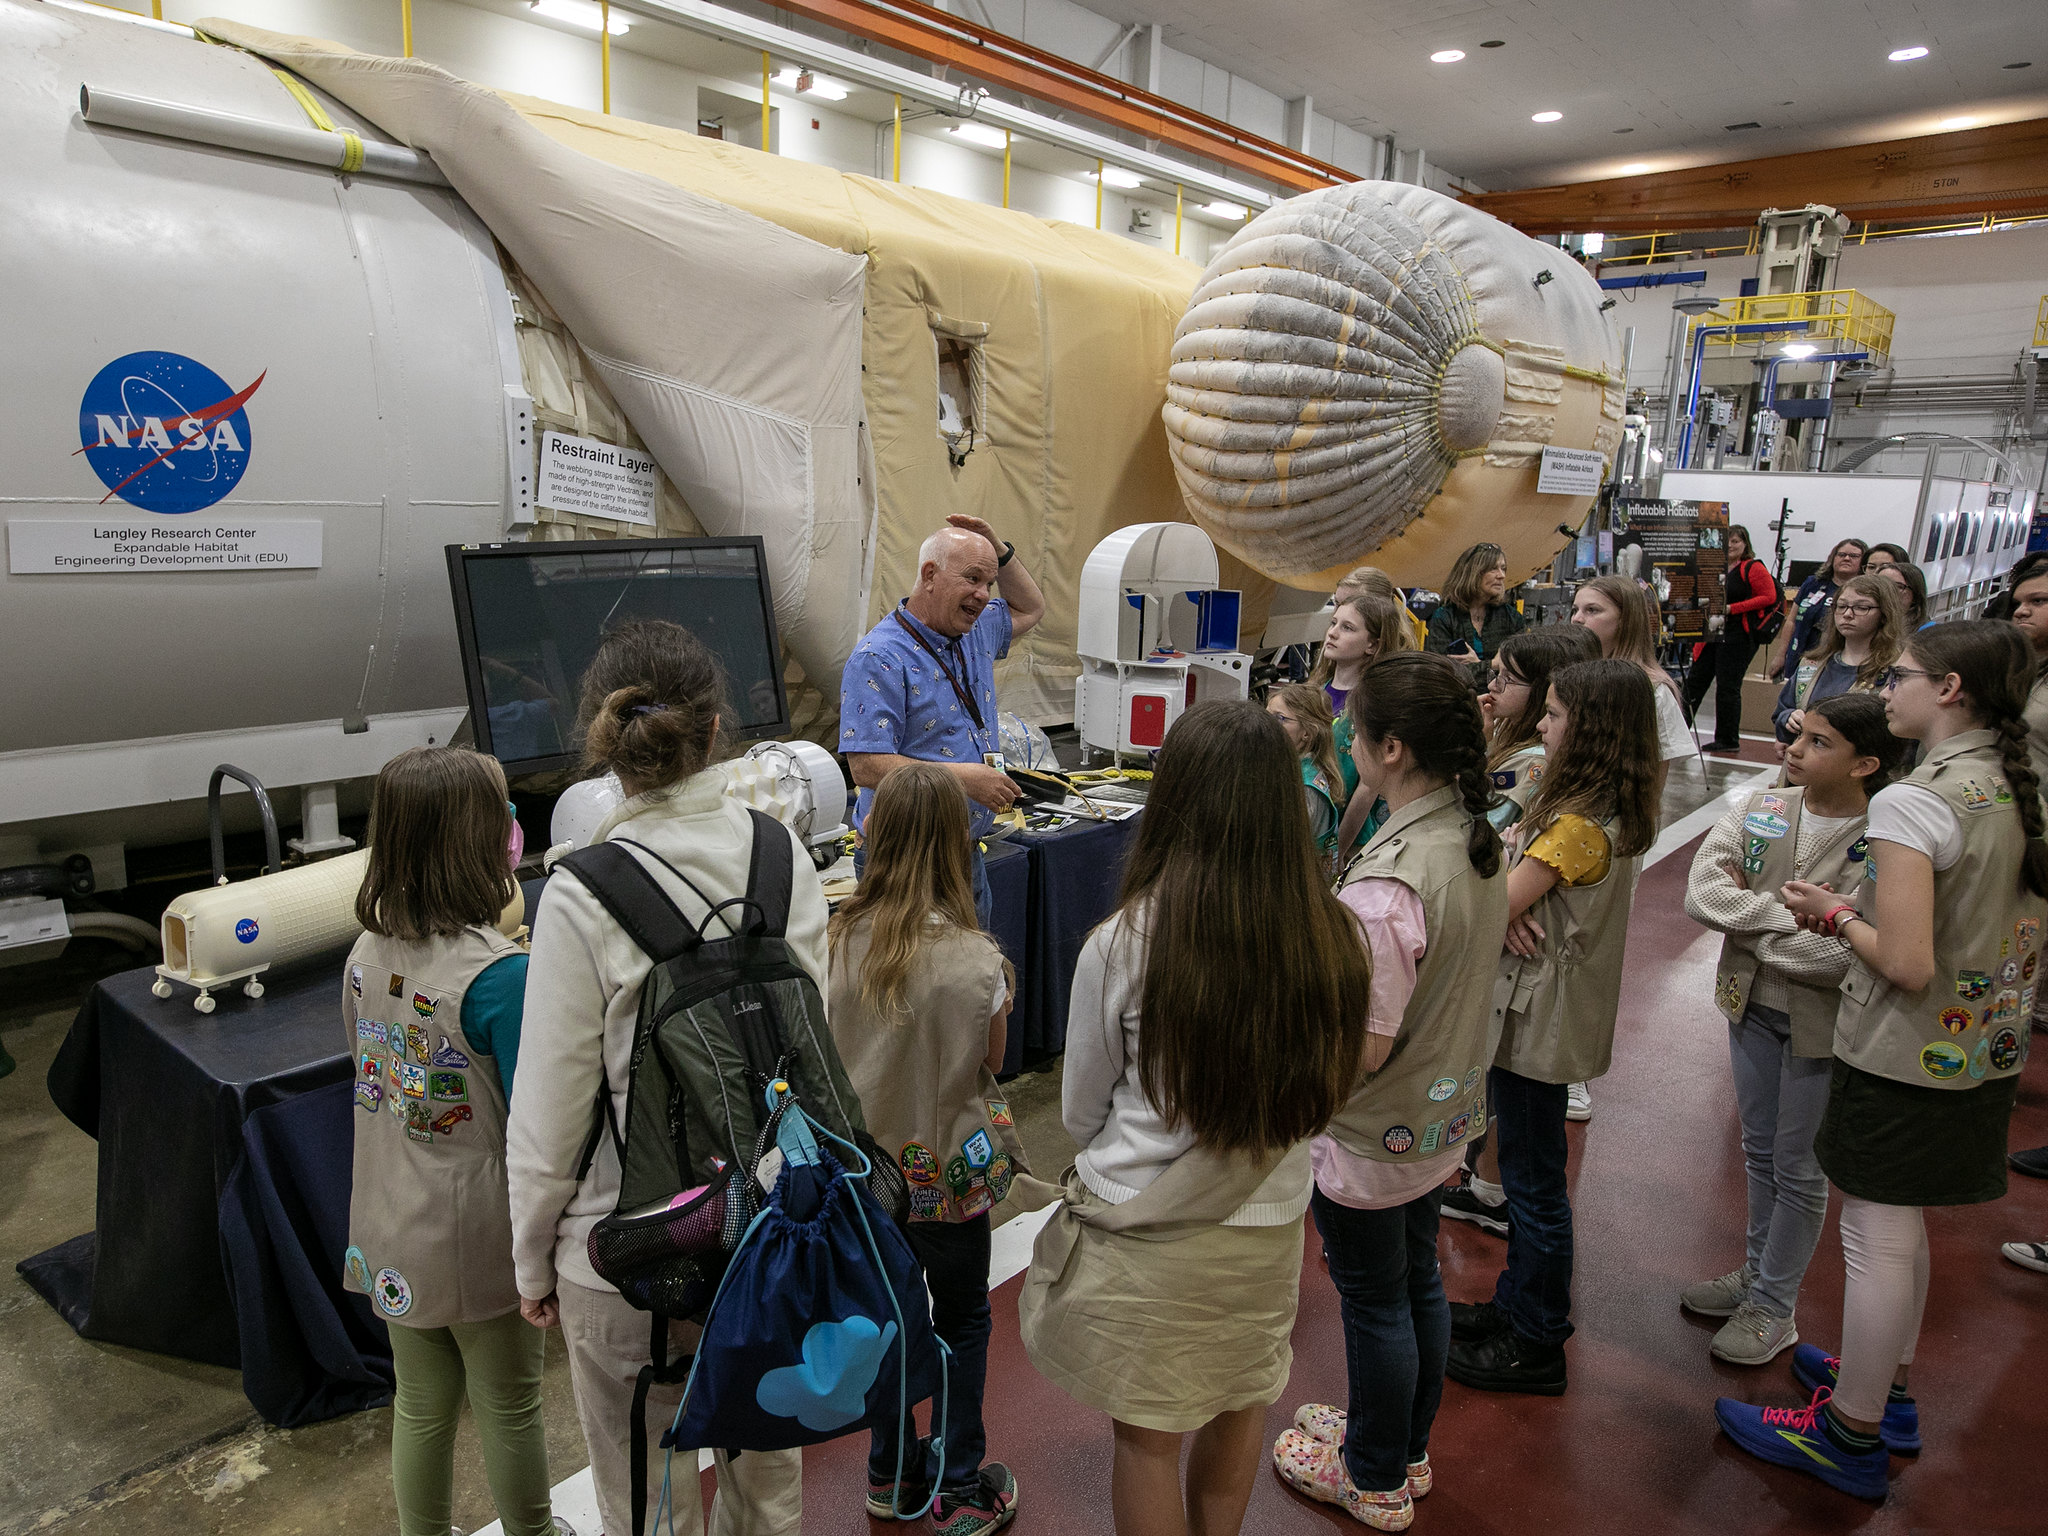 A group of girl scouts listens to a NASA Langley researcher during a tour of the center.